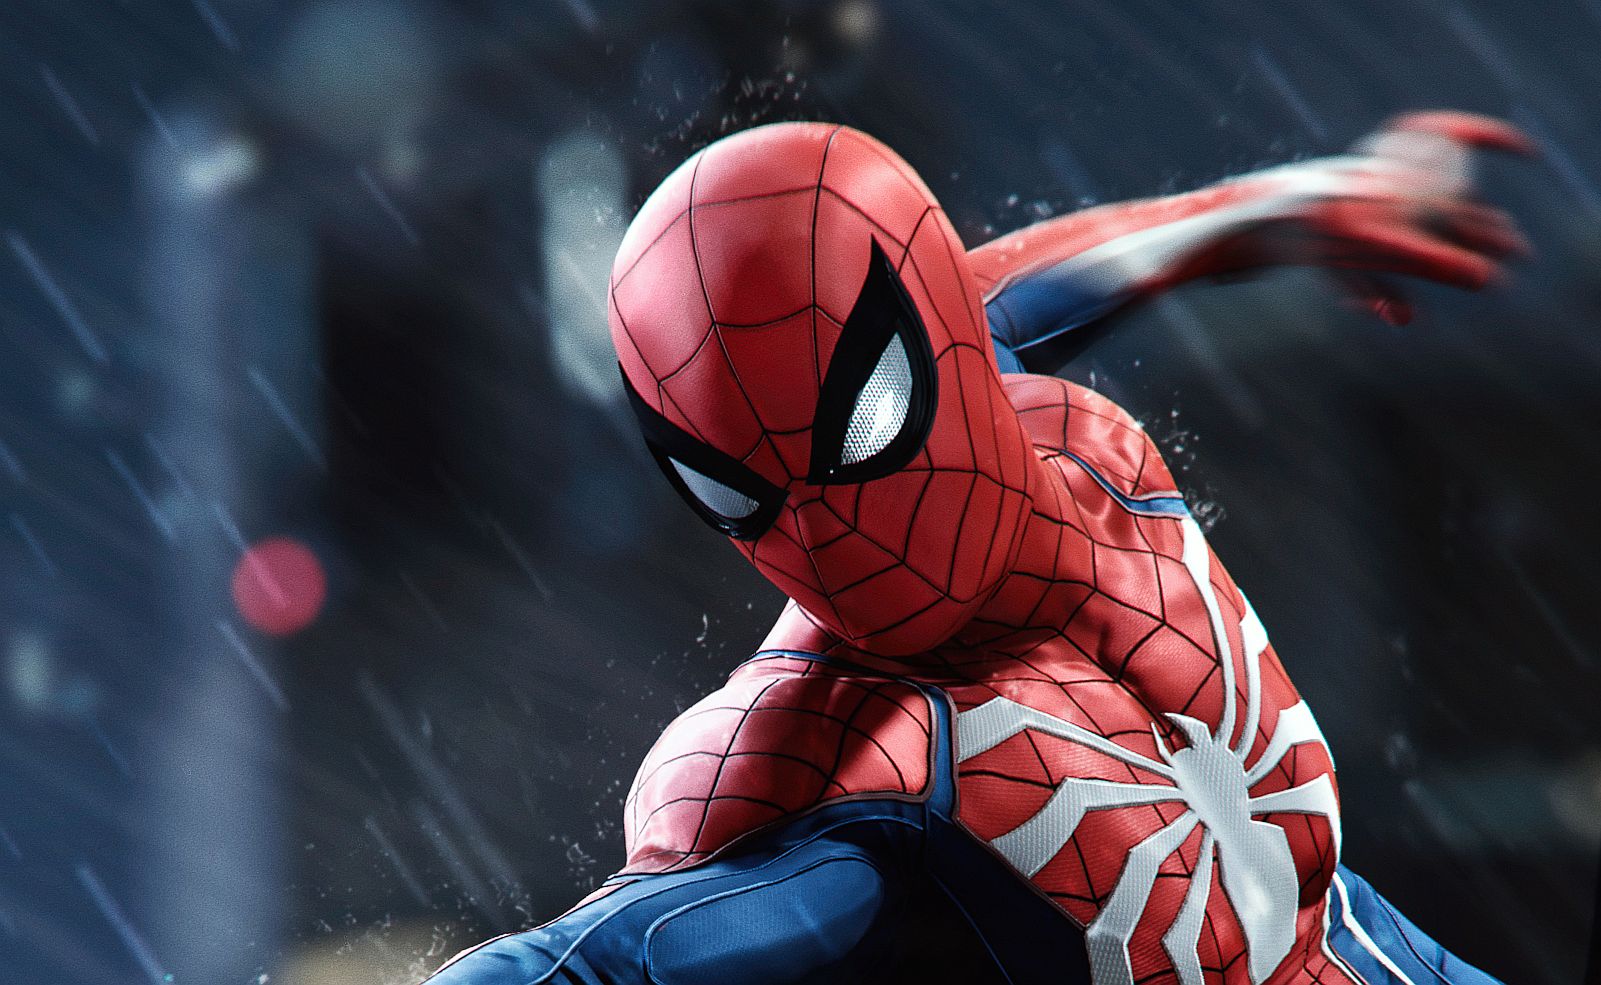 Image for UK charts: Spider-Man is now the fastest-selling PS4 game ever, on track to overtake Uncharted 4's record